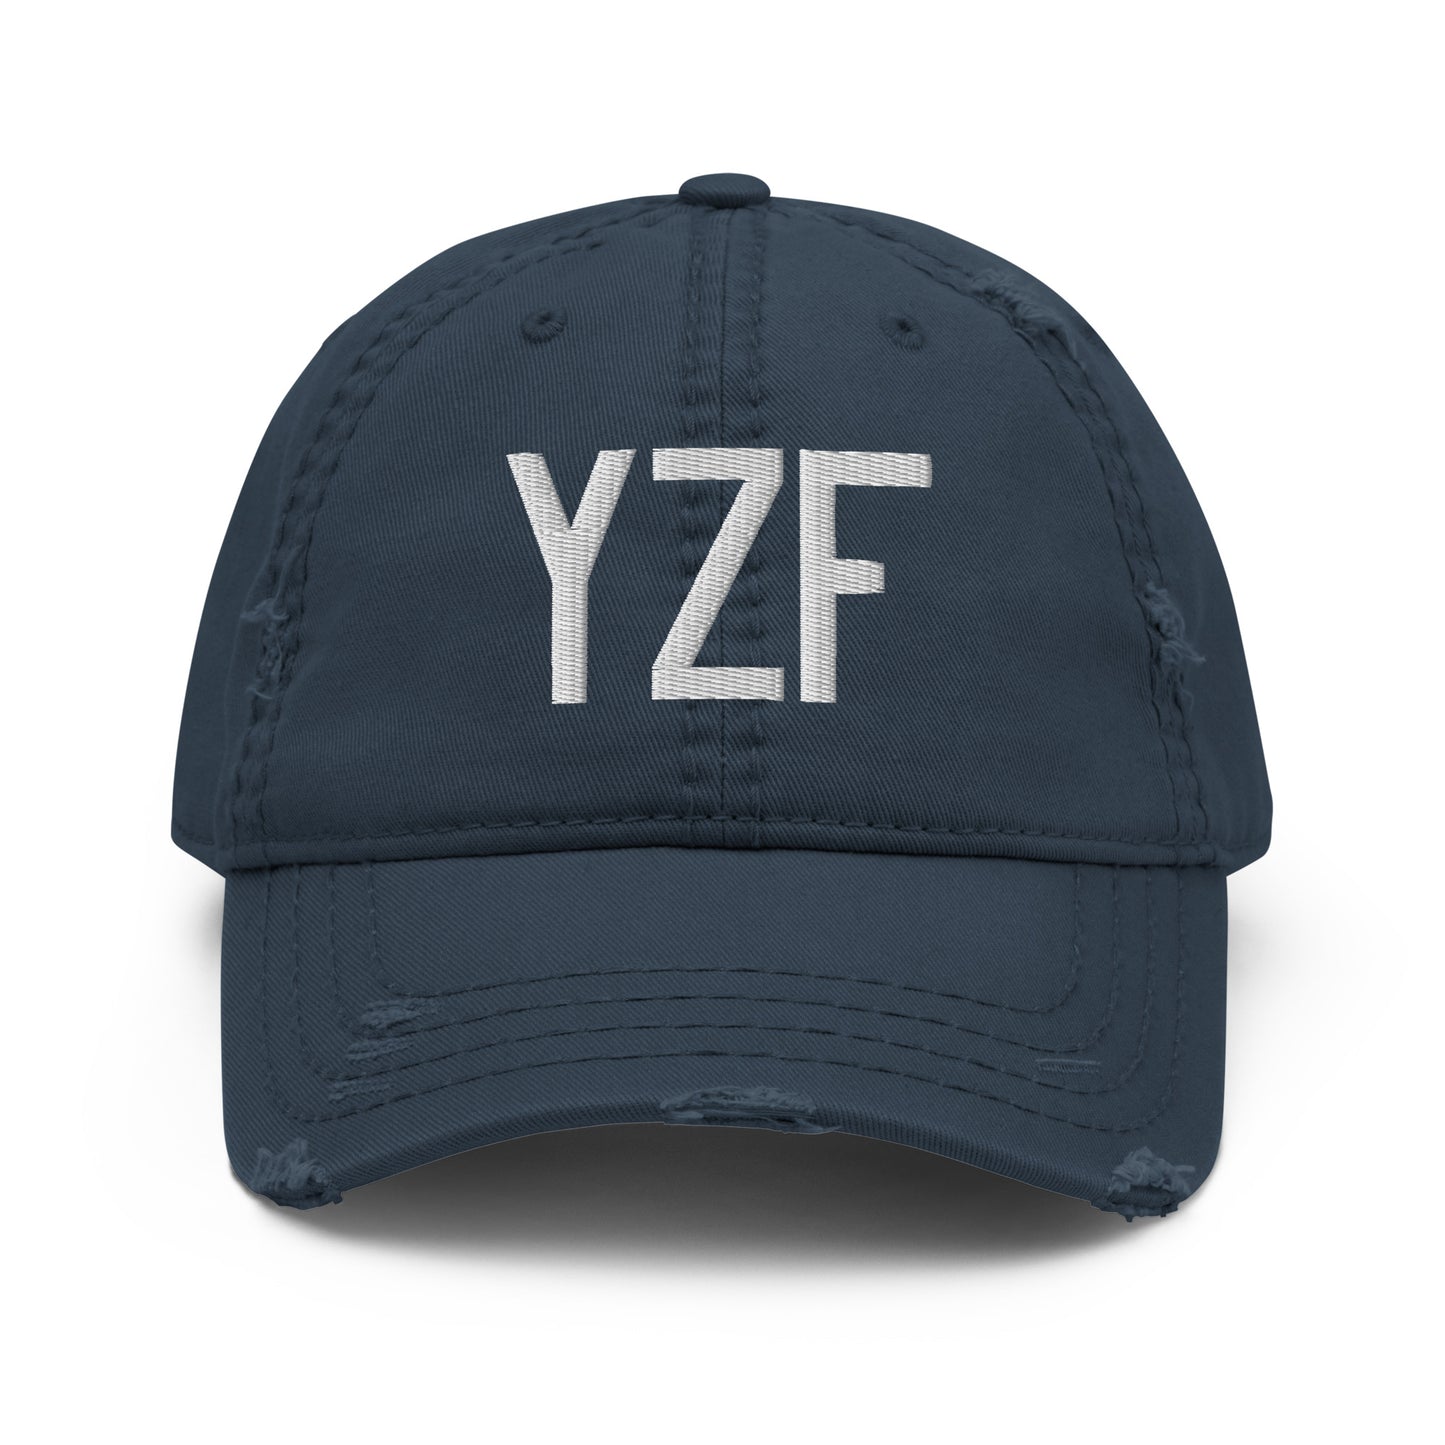 Airport Code Distressed Hat - White • YZF Yellowknife • YHM Designs - Image 13